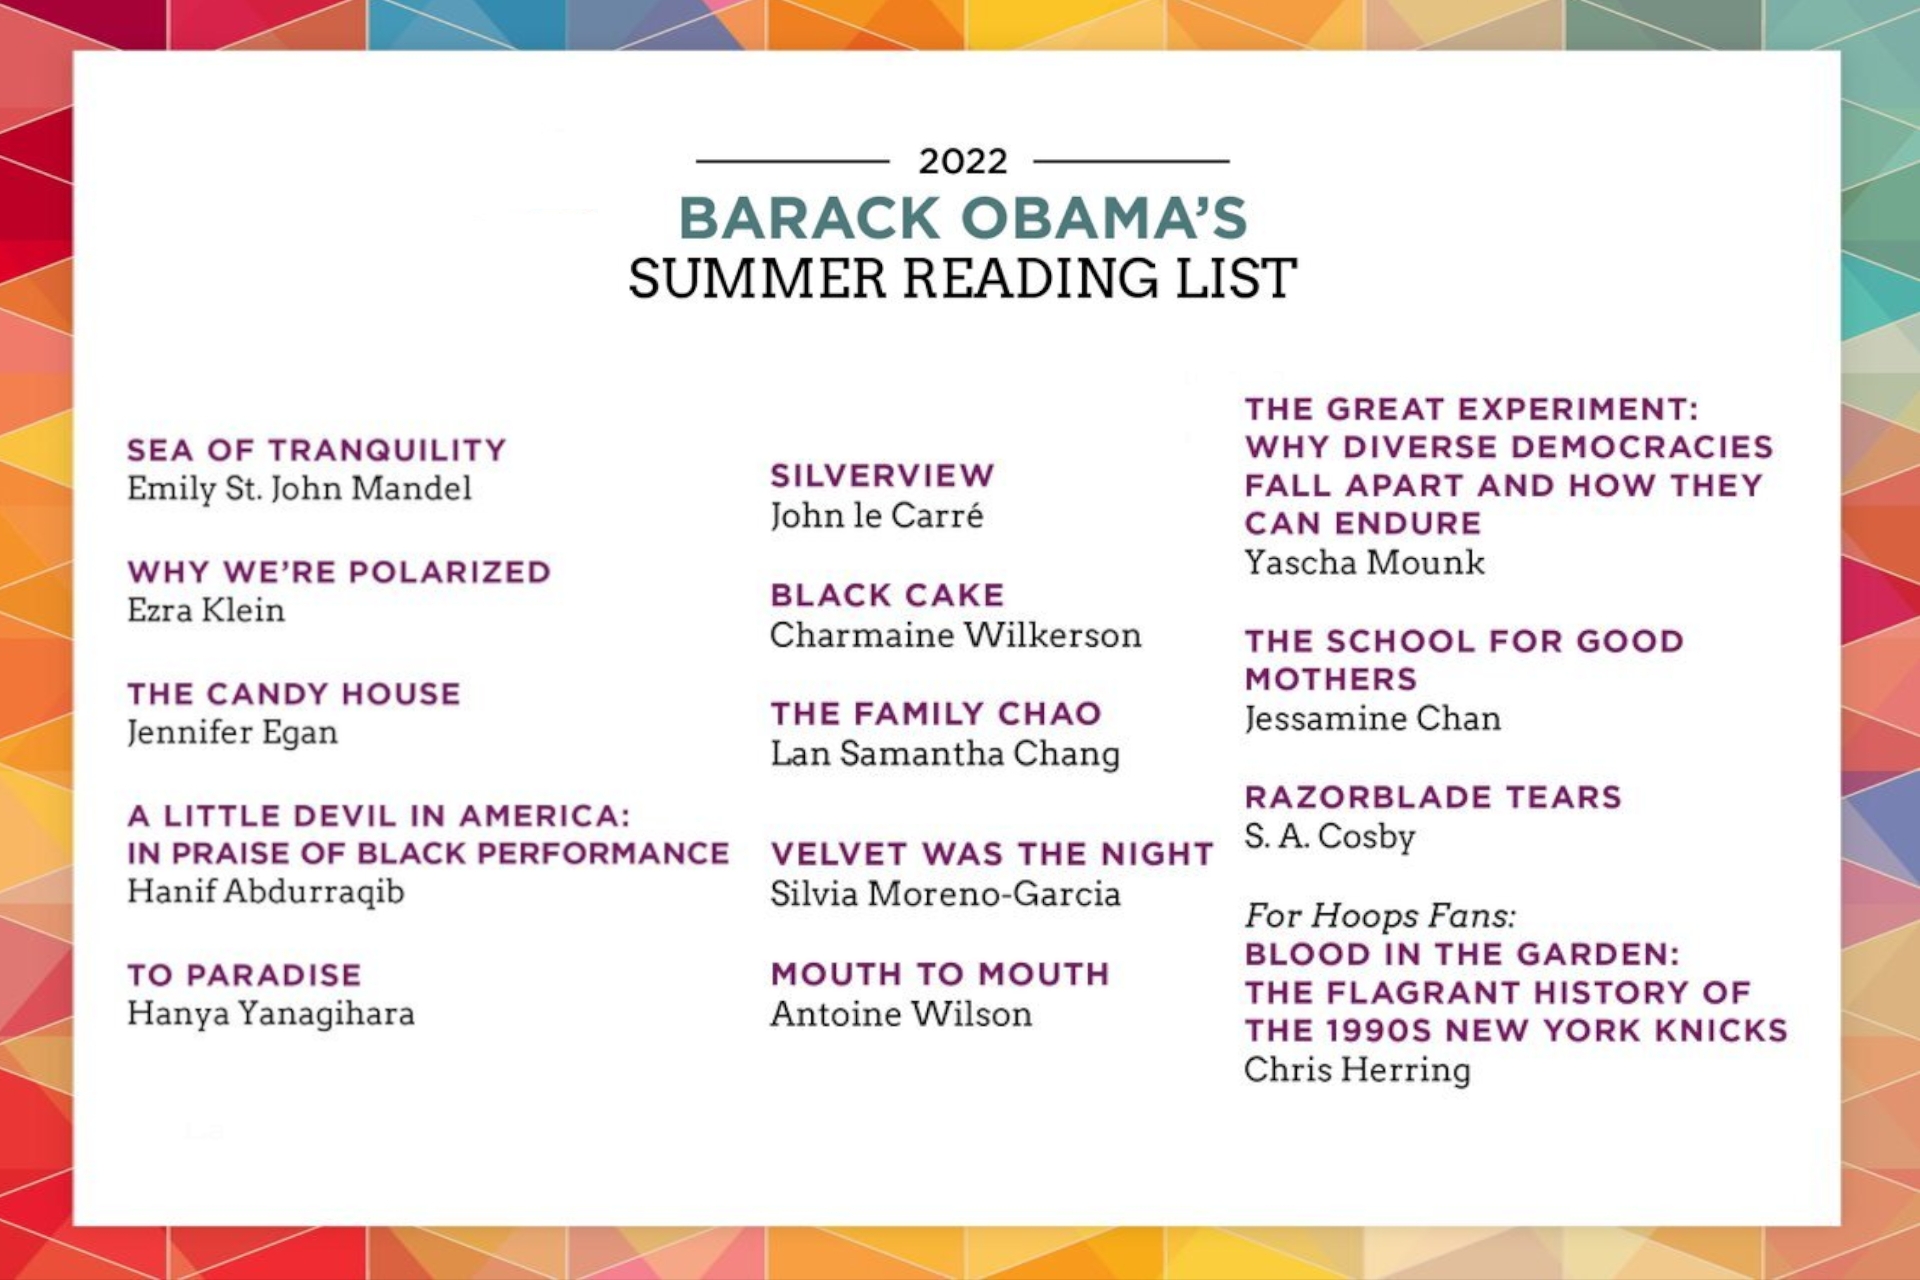 Barack Obama shares his 2022 summer reading list...and we love it!